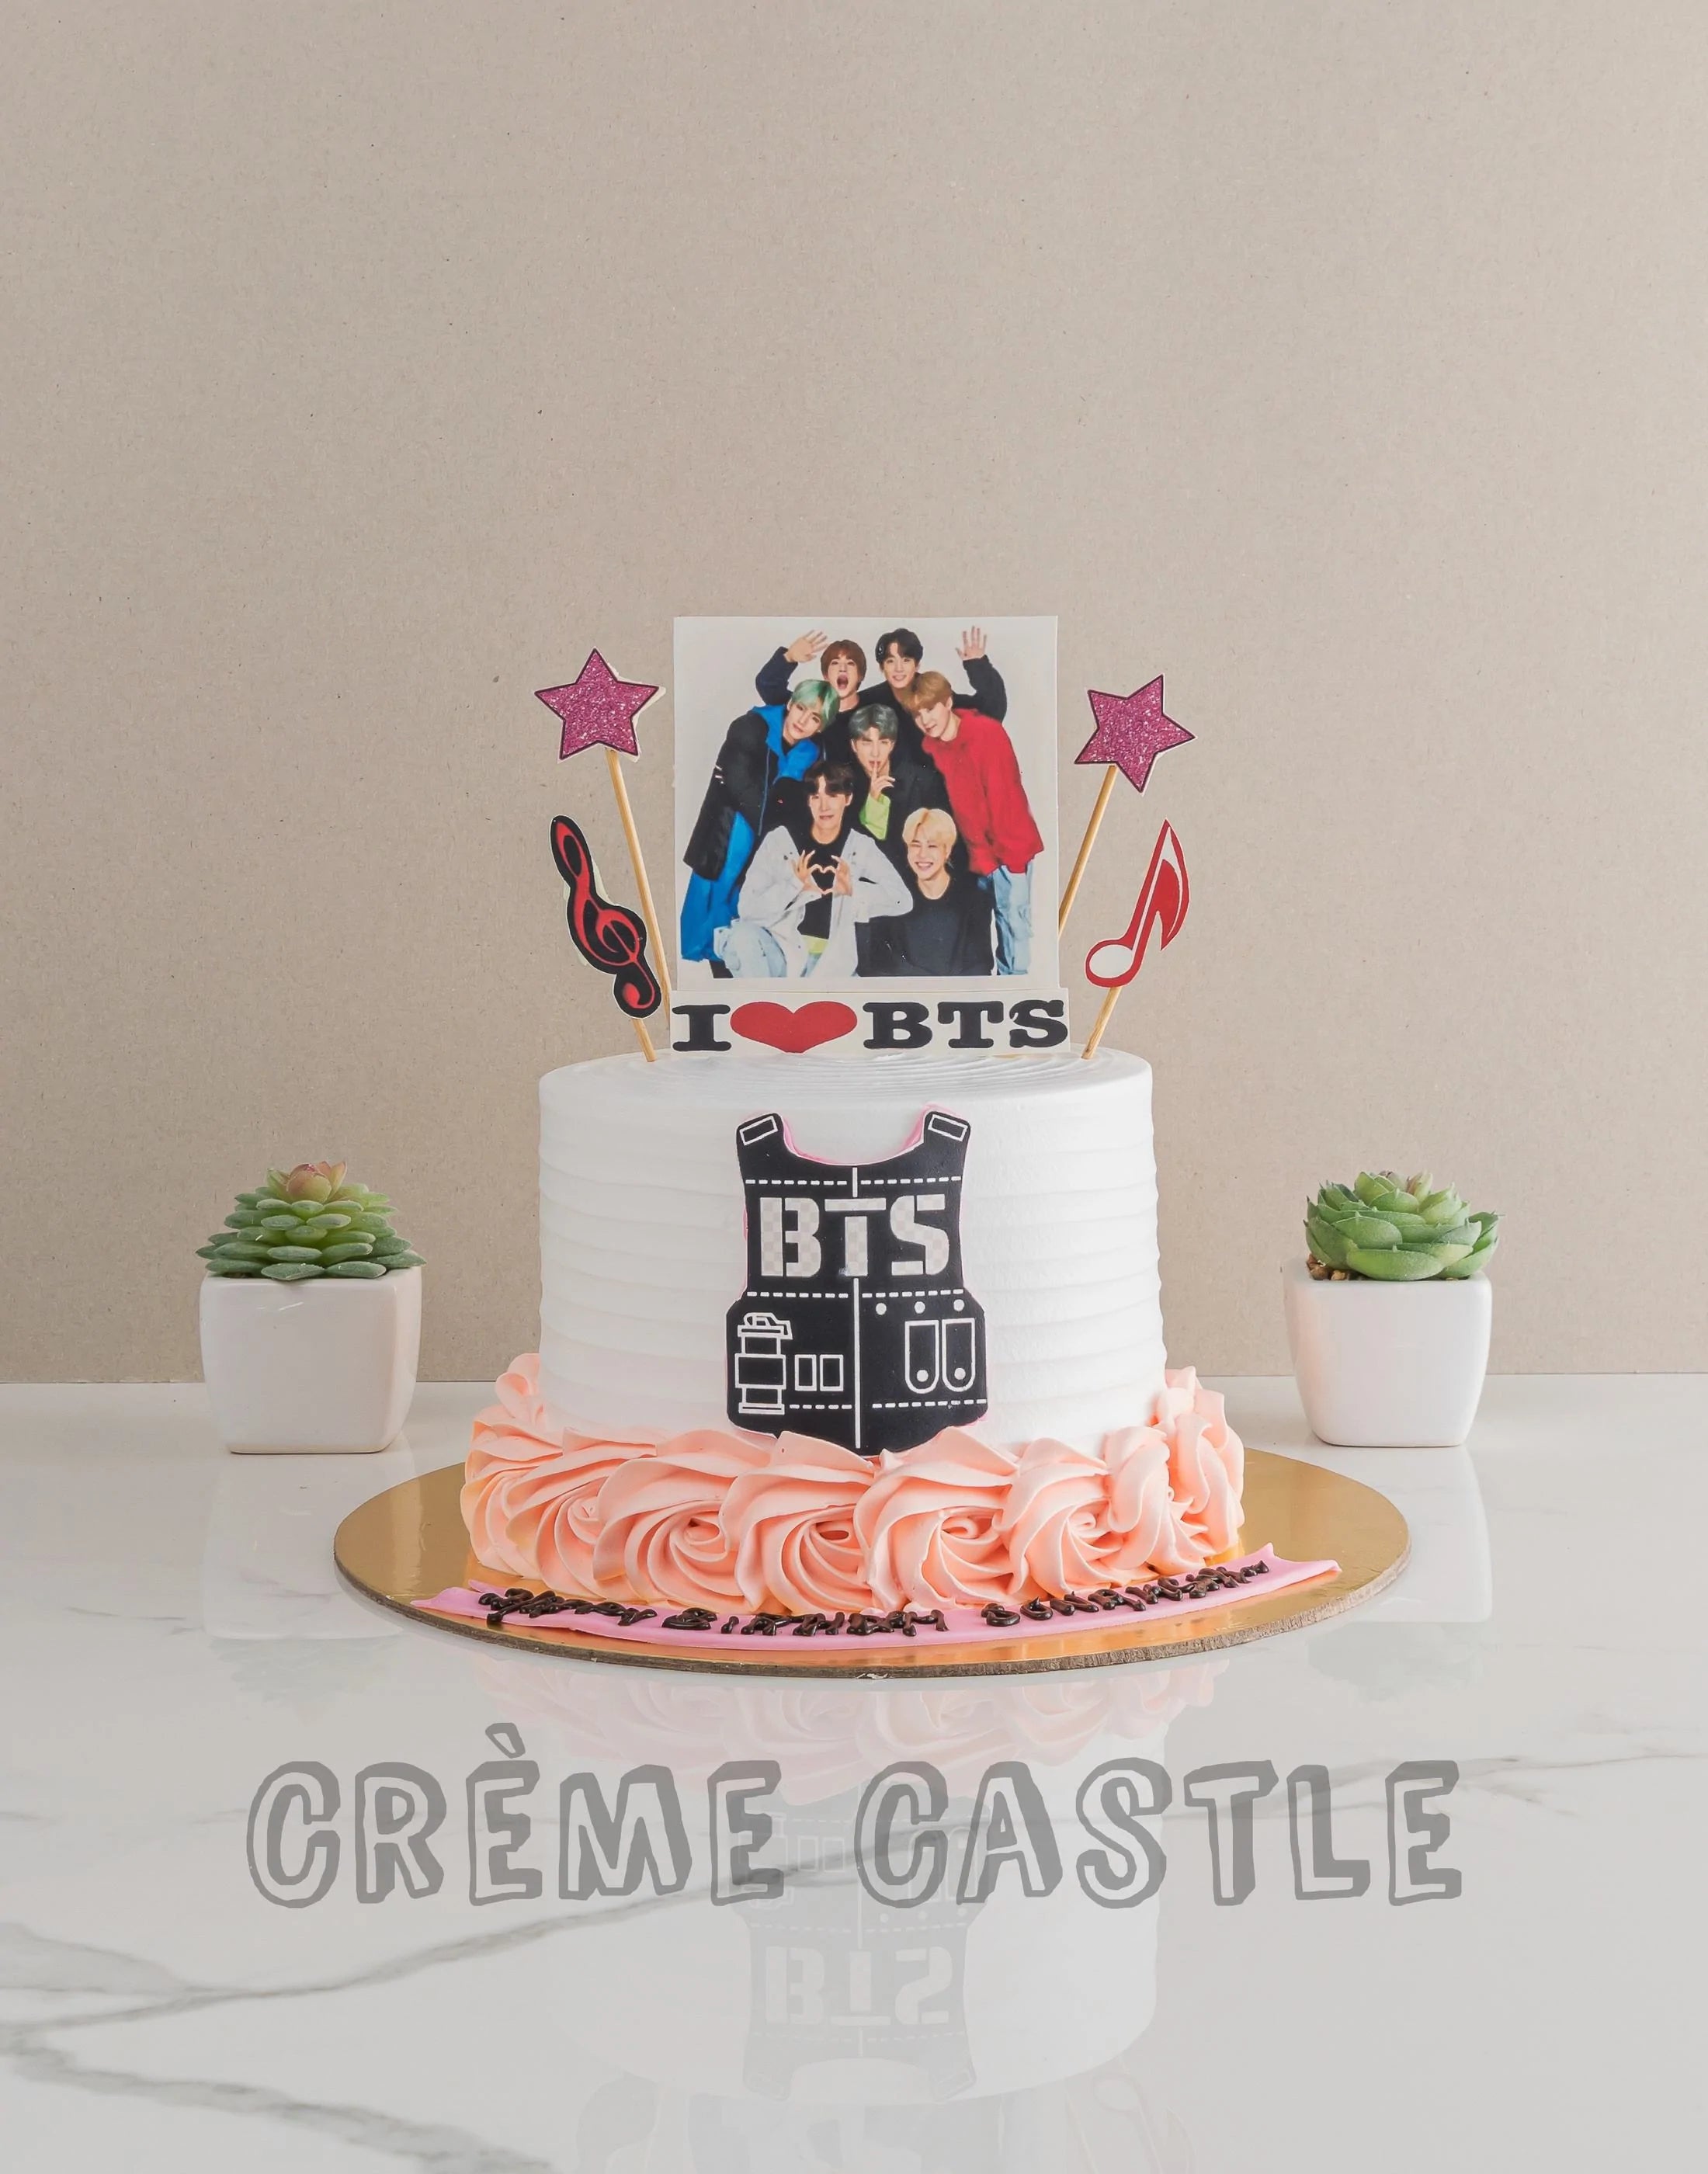 Amazon.com: BTS Cake Toppers Cupcake Toppers 25PCS Korean Singer Group  Themed Birthday Decorations Happy Birthday Party Supplies Cake Decorations  for Girls Kids : Grocery & Gourmet Food